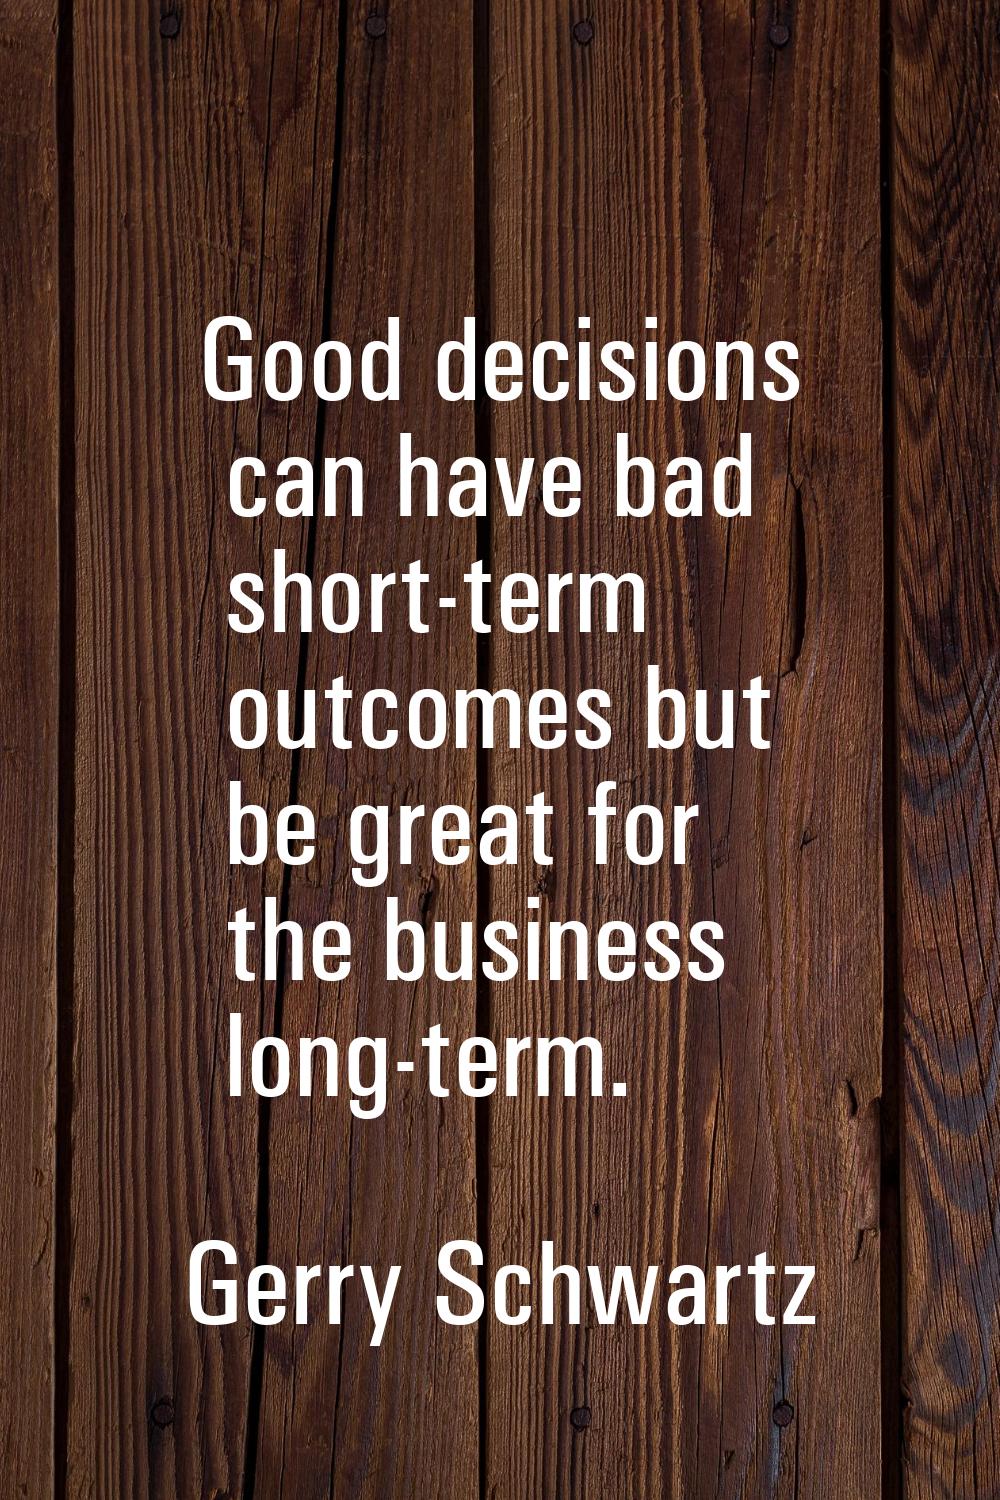 Good decisions can have bad short-term outcomes but be great for the business long-term.